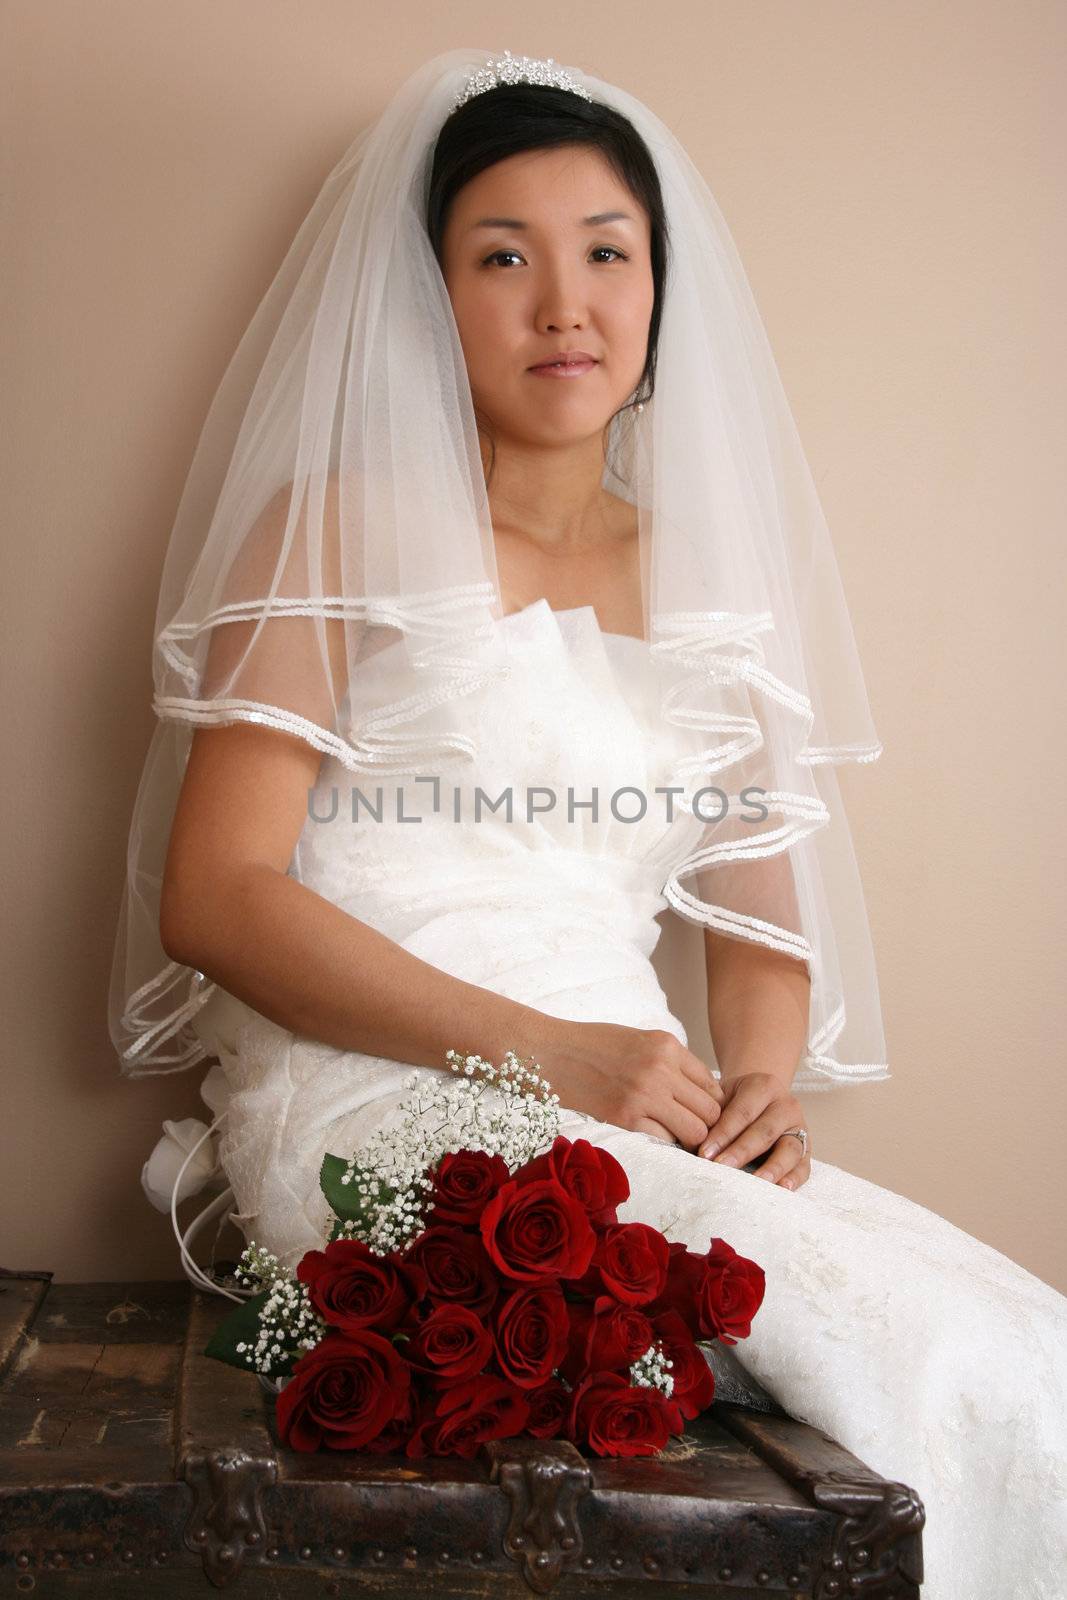 Beautiful Bride by vanell